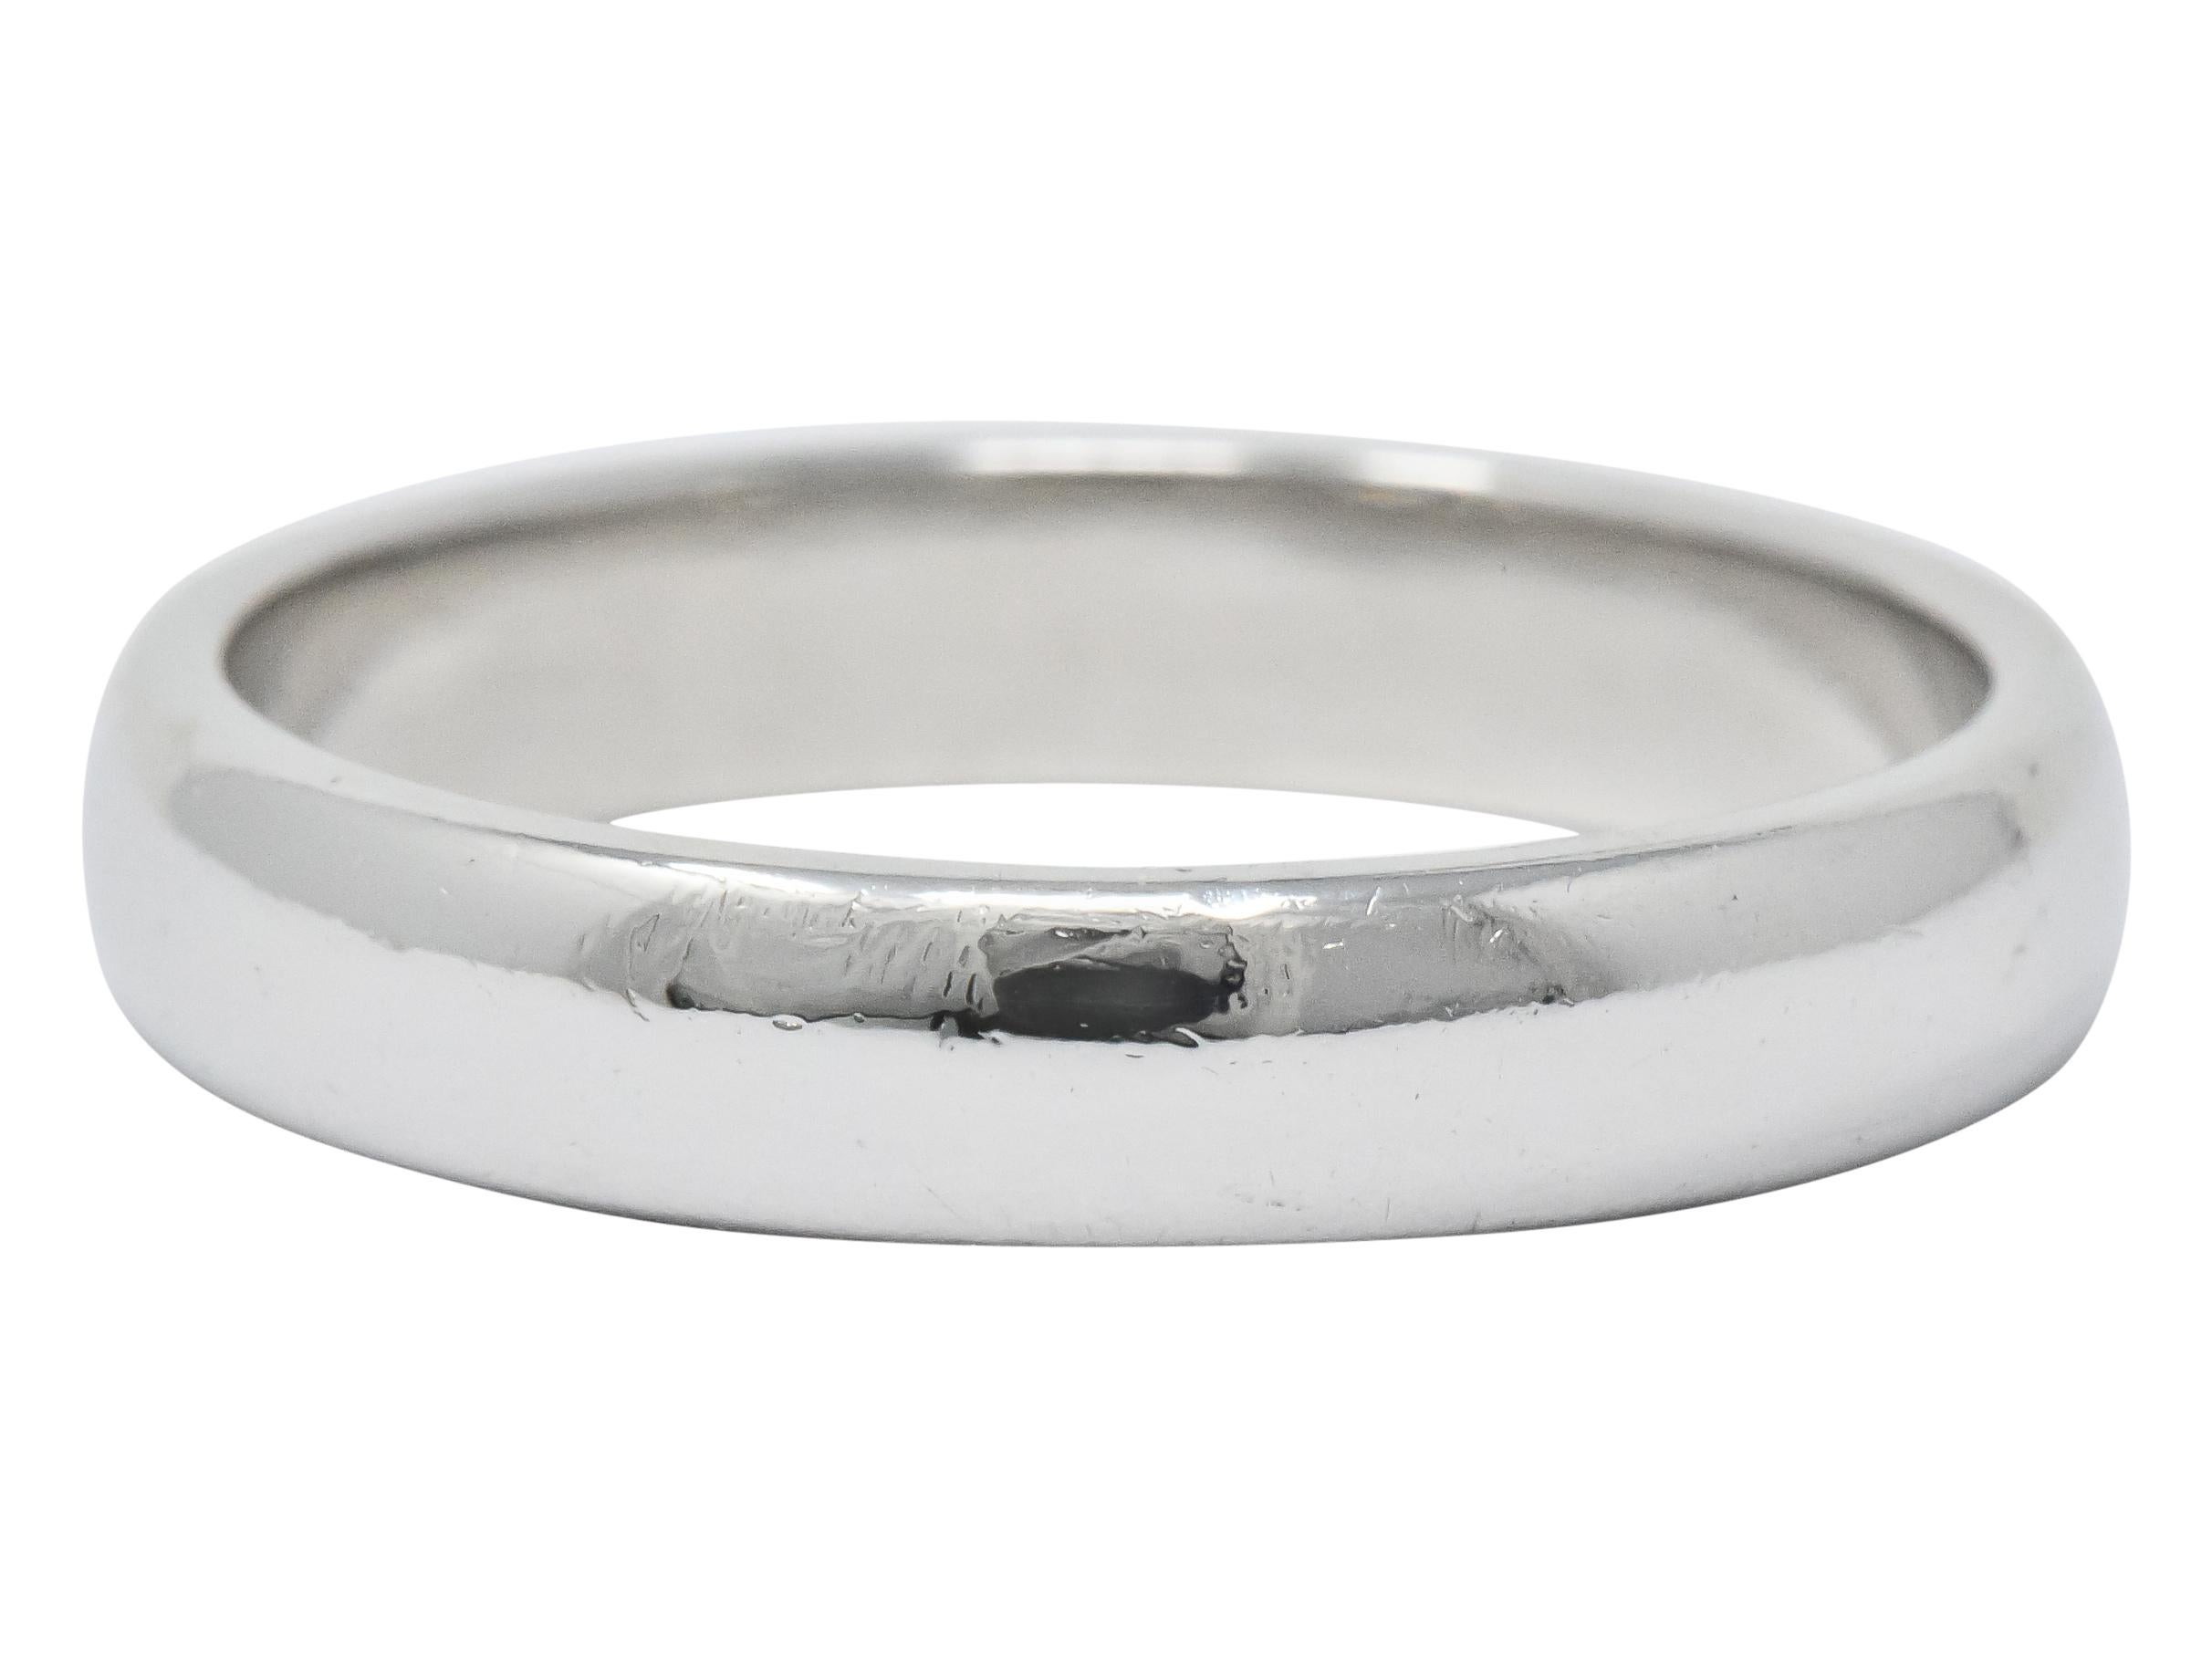 High polished half dome band

Fully signed 1999 Tiffany & Co.

Stamped PT 950 for platinum

Ring Size: 10 3/4 & Sizable

Top measures: 4.4 mm and sits 1.7 mm high

Total weight: 10.2 grams

Reflective. Classic. Substantial.



Stock Number: We-2772